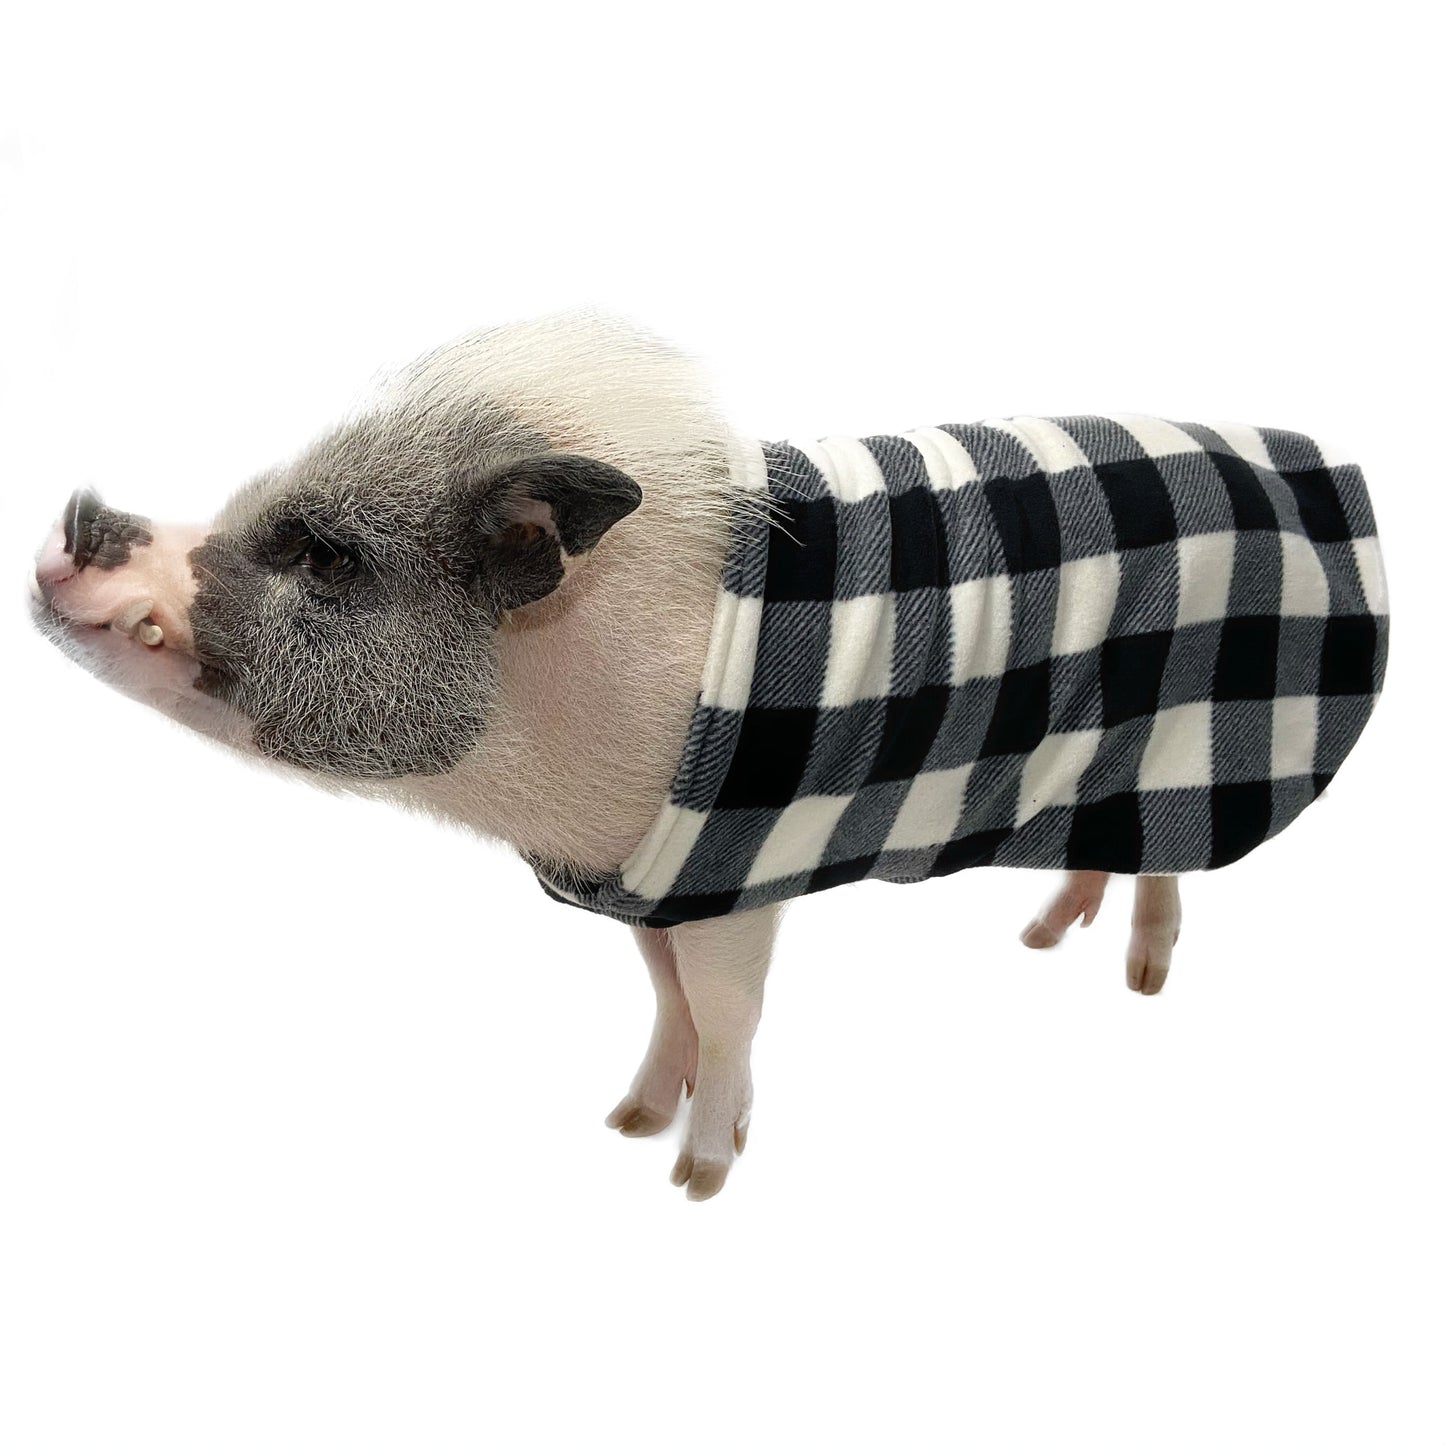 Fleece Strap Sweater Double Layer Pig Coat with Leash Hole - Mini Pig Clothes, Warm Winter Jacket, Clothing for Potbelly Pigs, Hogs, & Boars